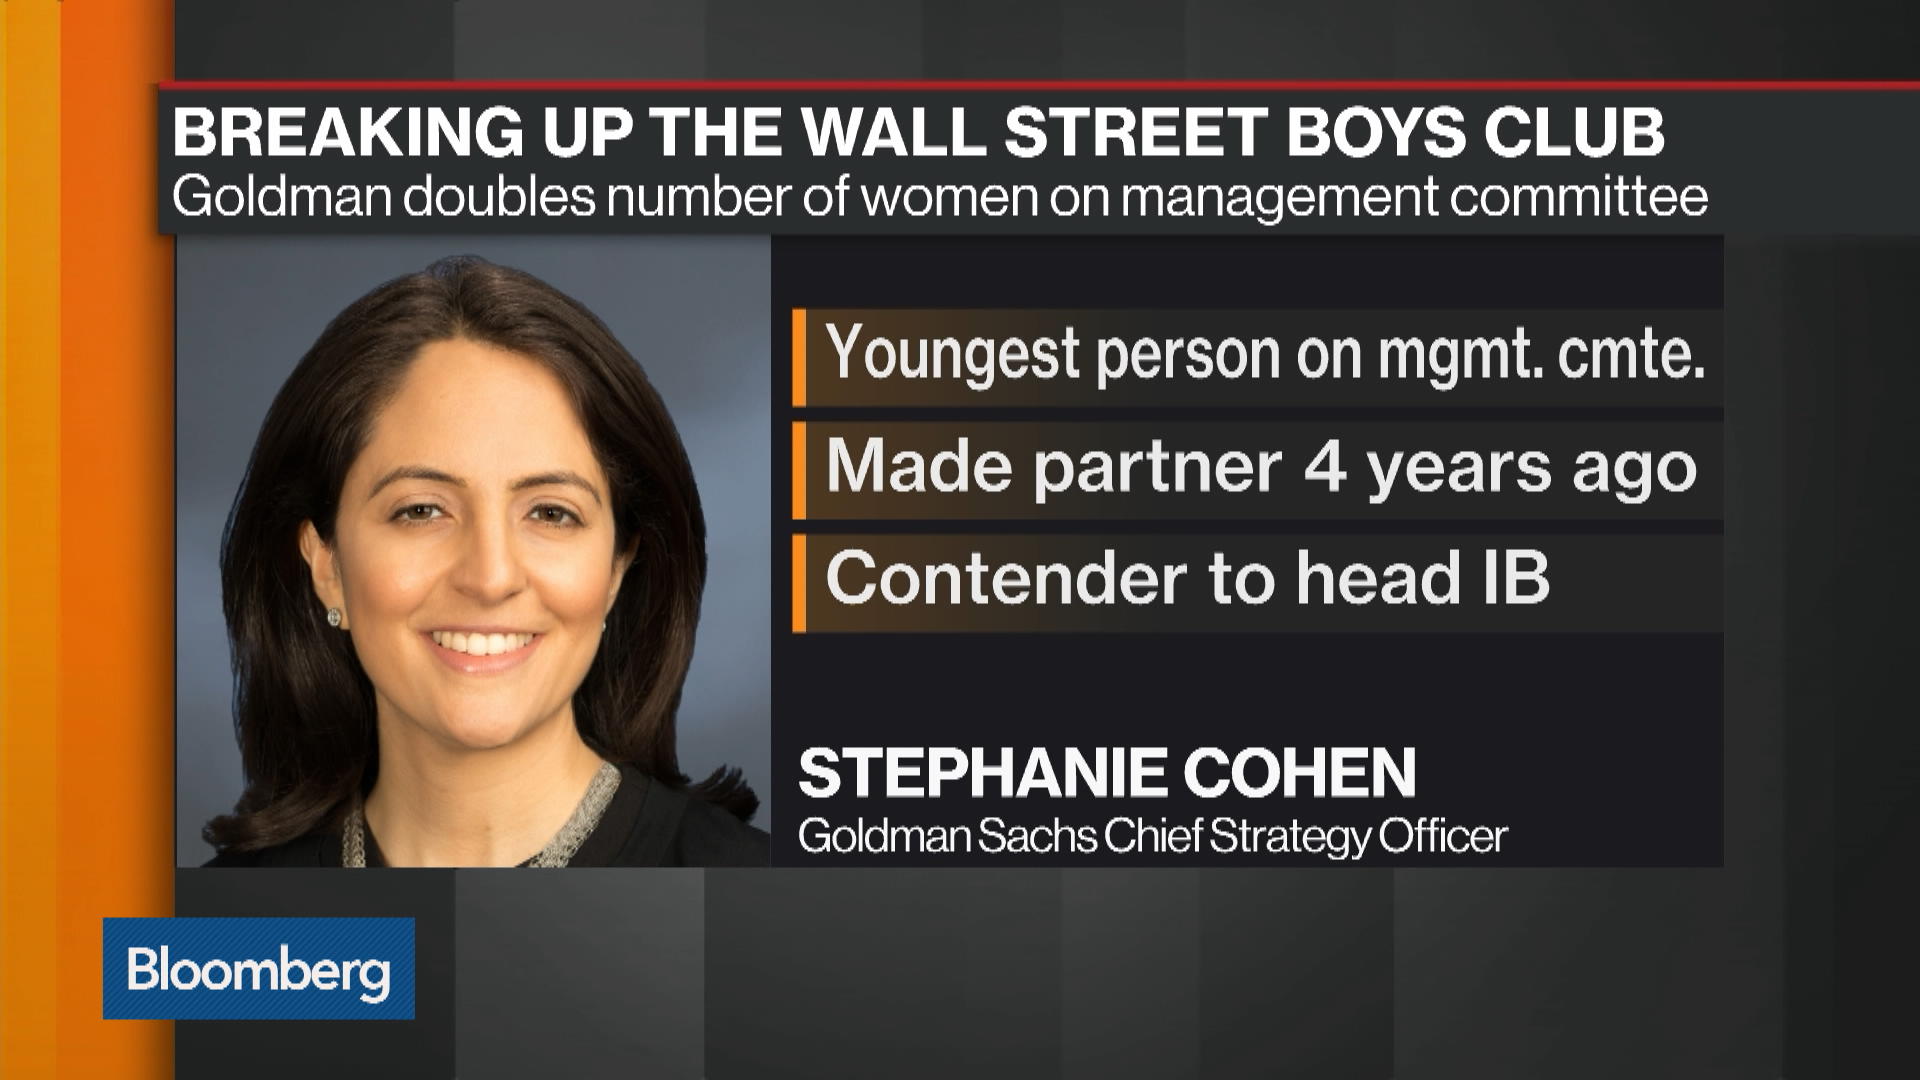 Goldman Sachs' Stephanie Cohen Is Taking Another Leave of Absence